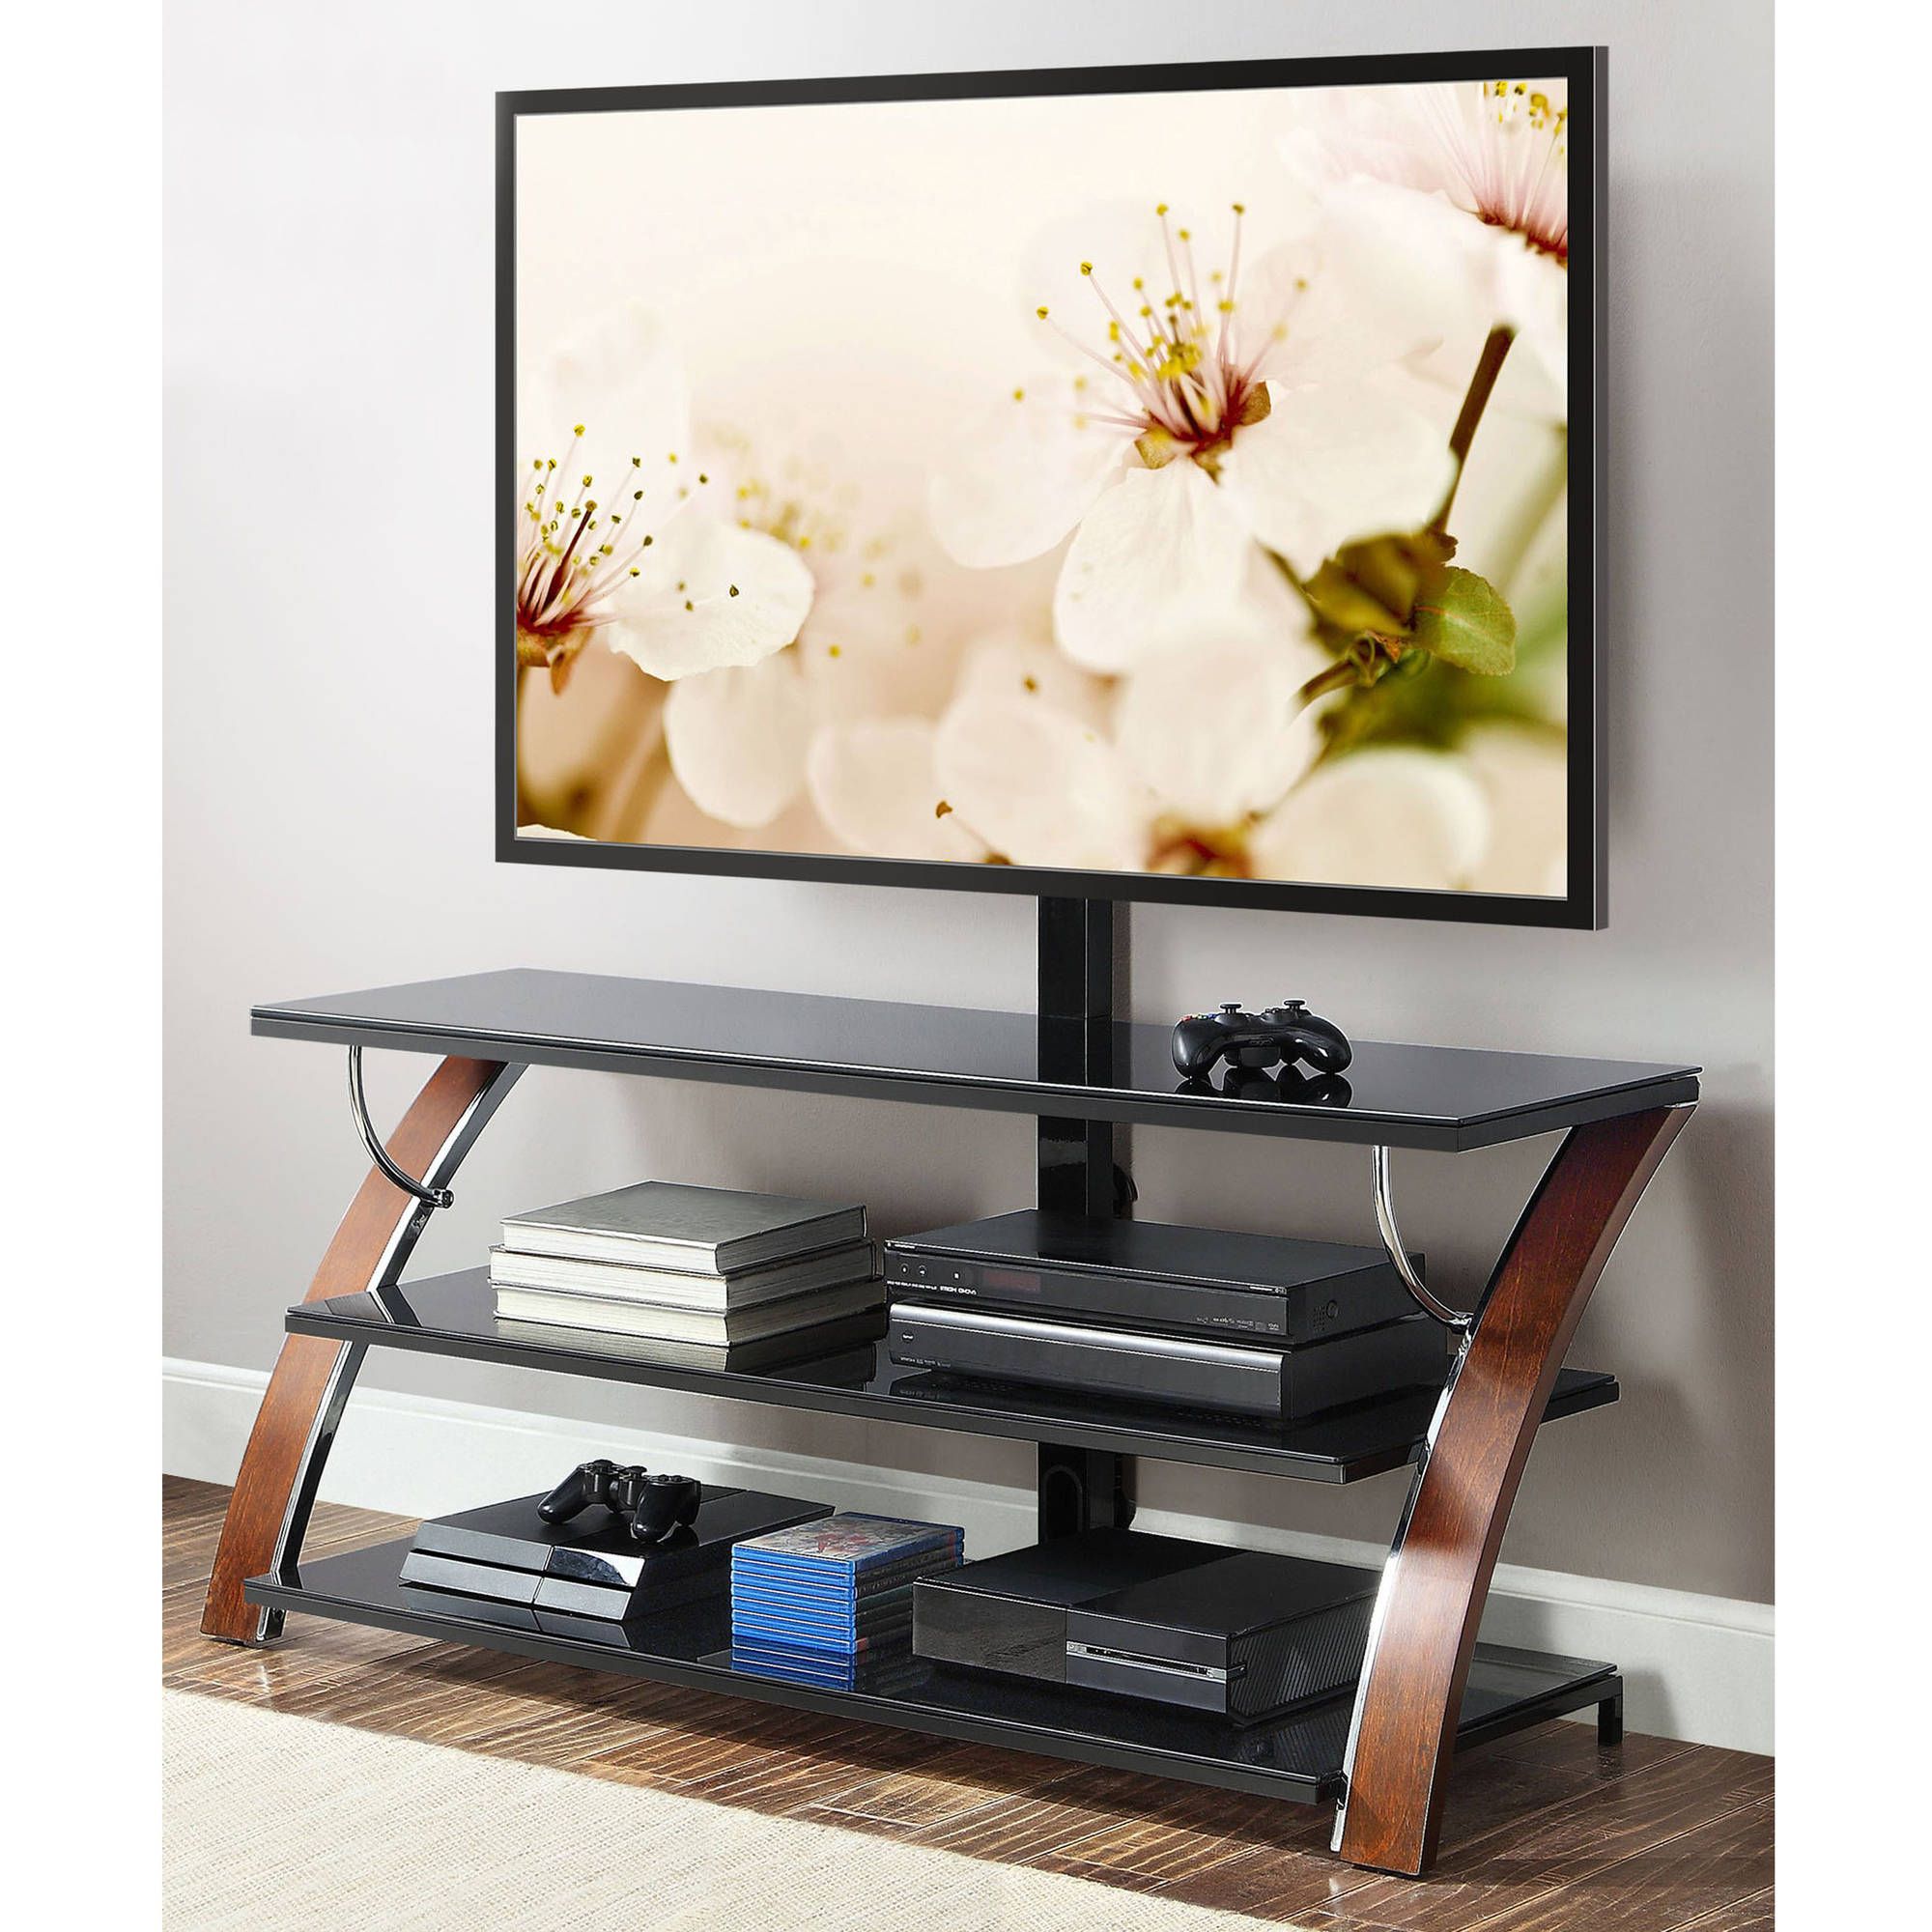 Mainstays Tv Stand For Tvs Up To 55", Multiple Finishes With Regard To Mainstays 4 Cube Tv Stands In Multiple Finishes (View 4 of 15)